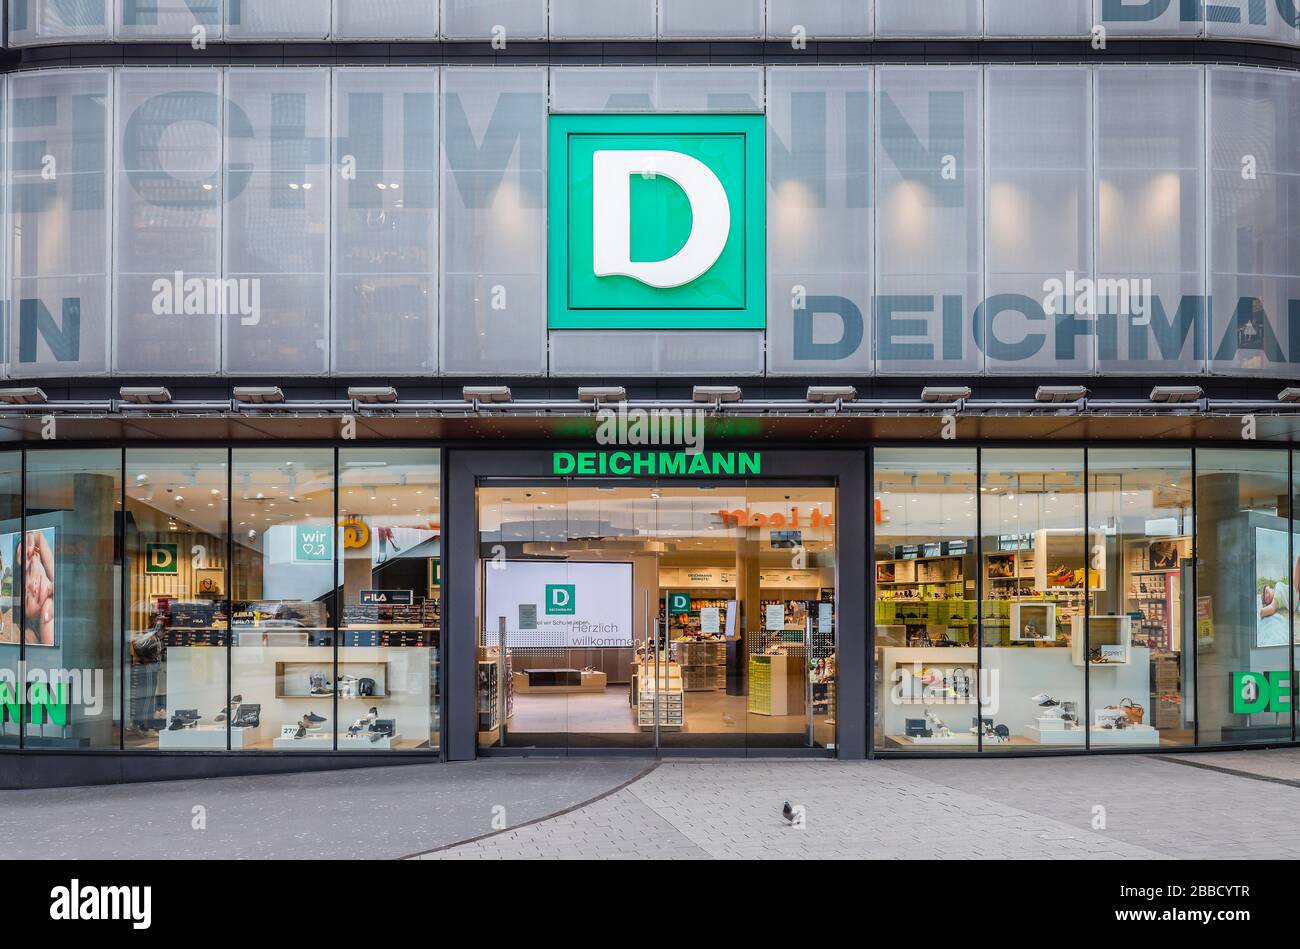 Deichmann Store High Resolution Stock Photography and Images - Alamy